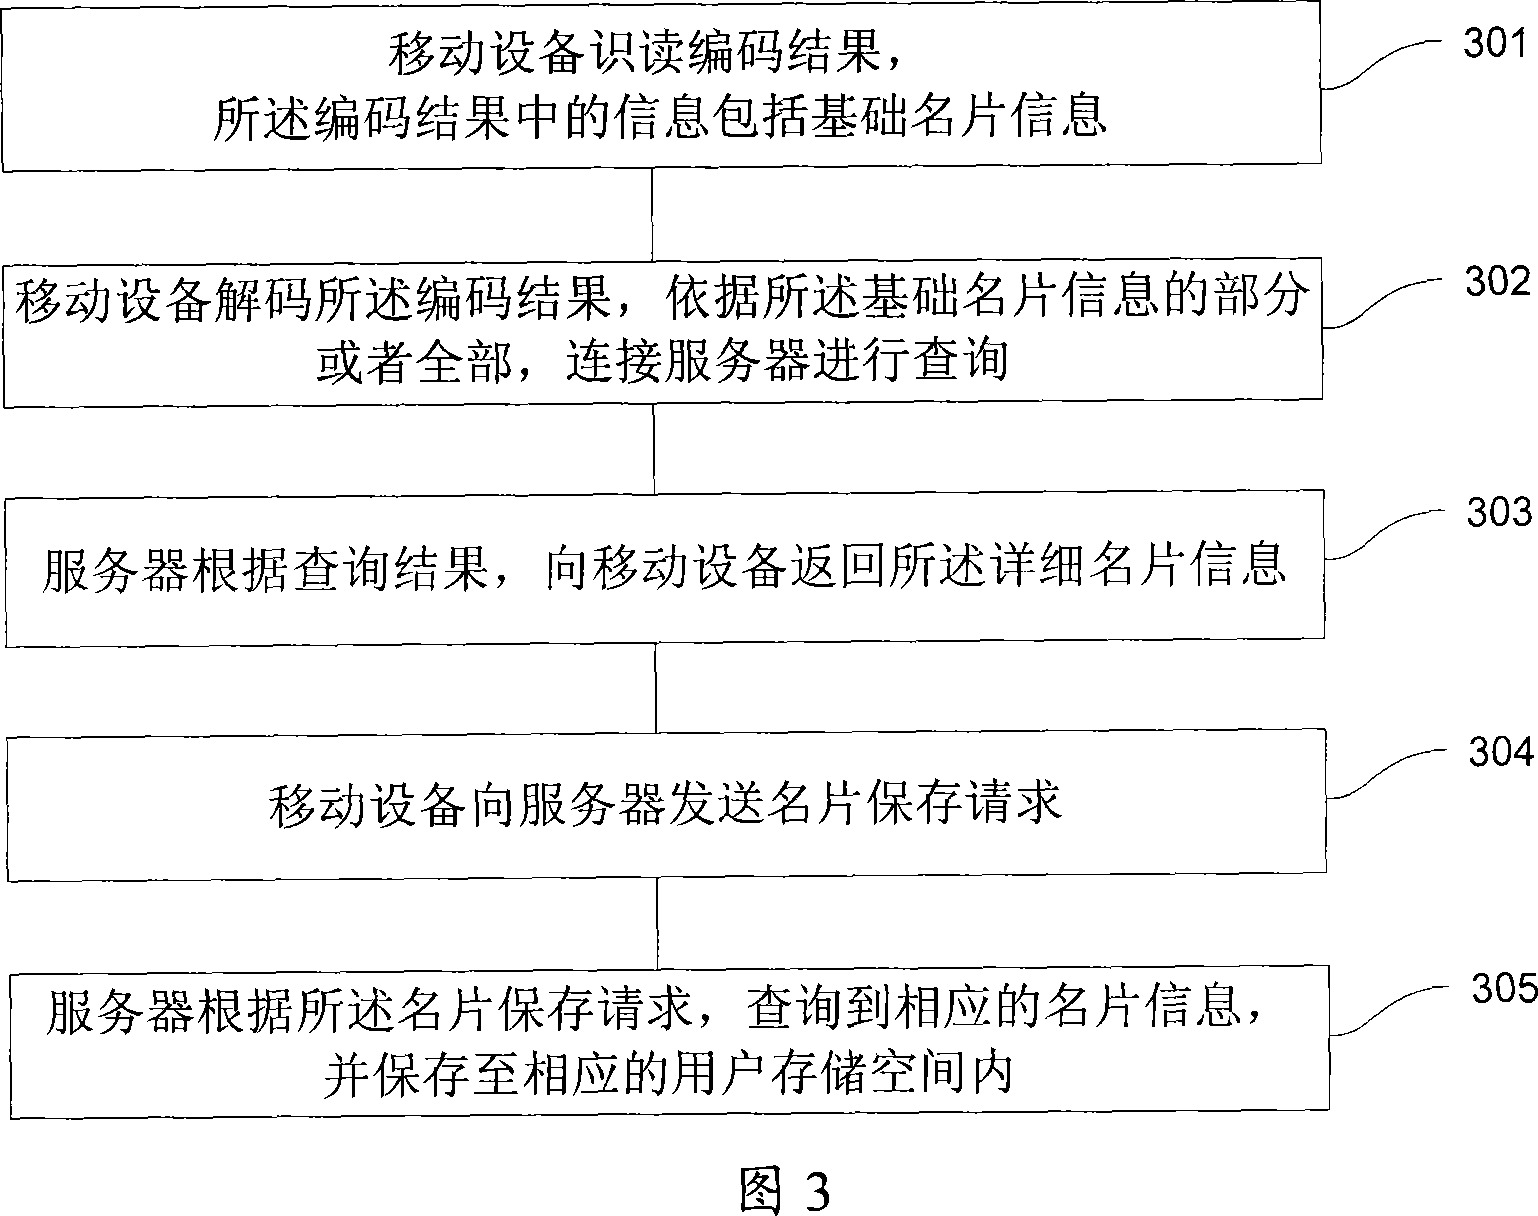 Method and system for rapid searching and managing the information of name card